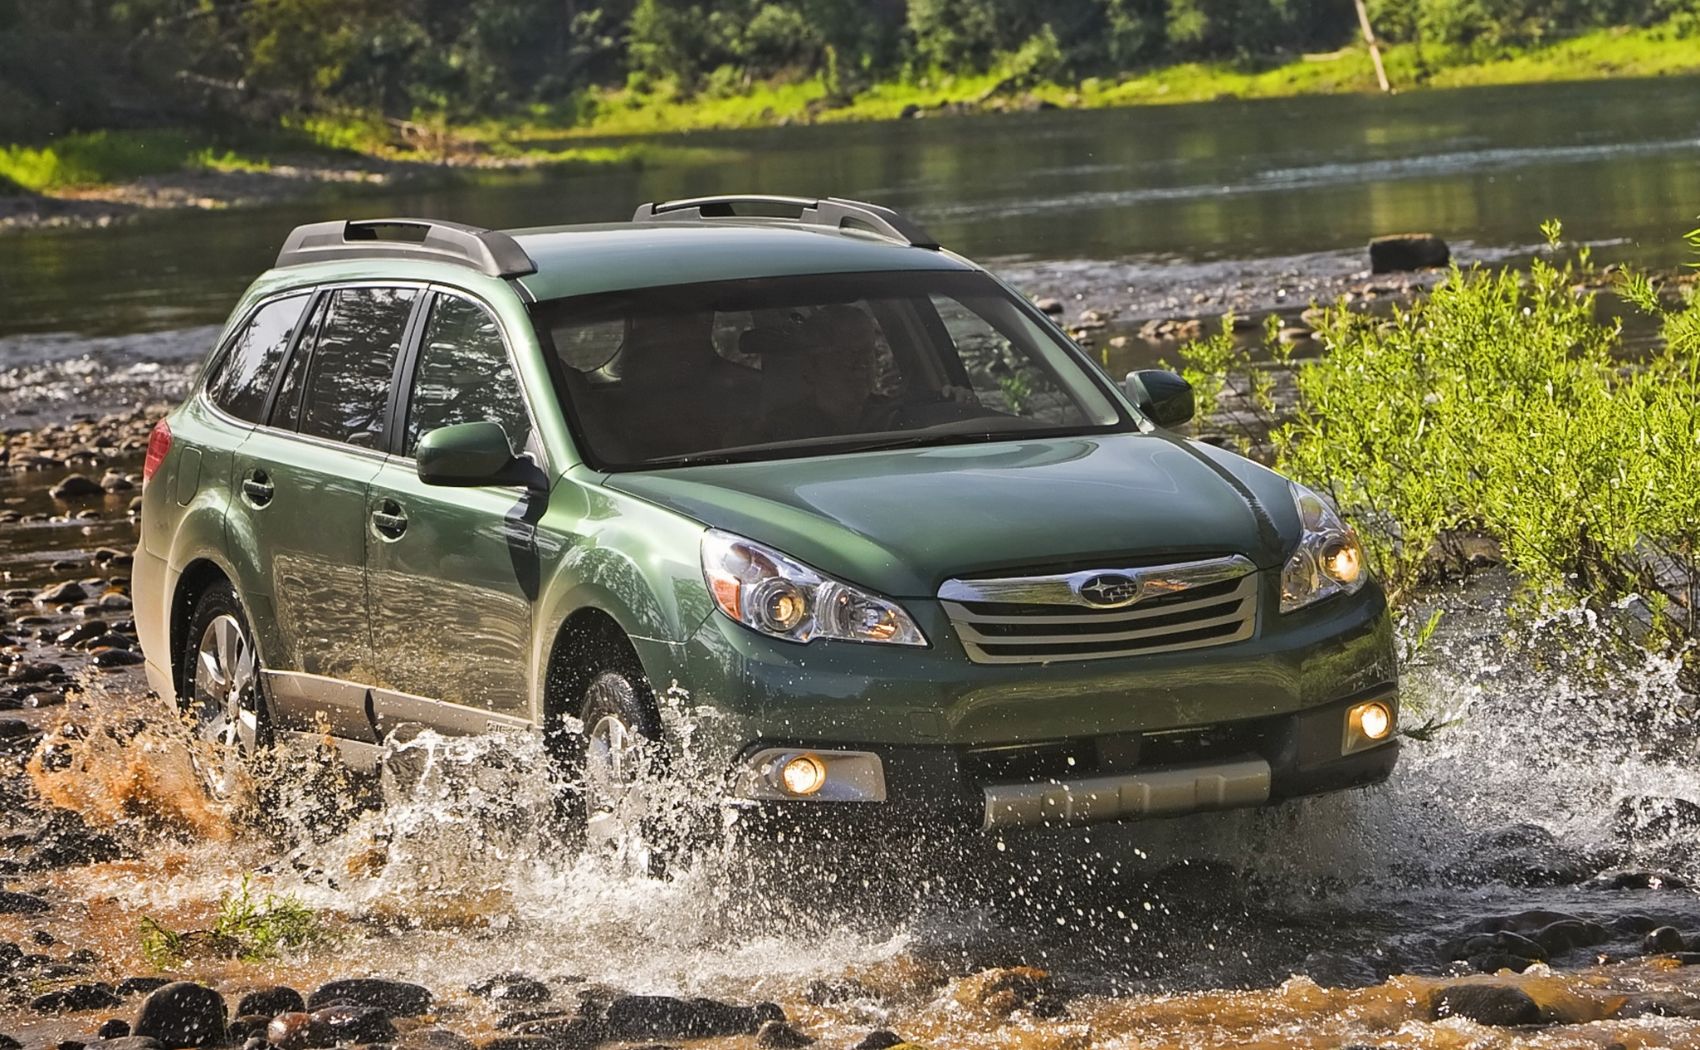 Buying a Used FourthGen Subaru Outback The Most Common